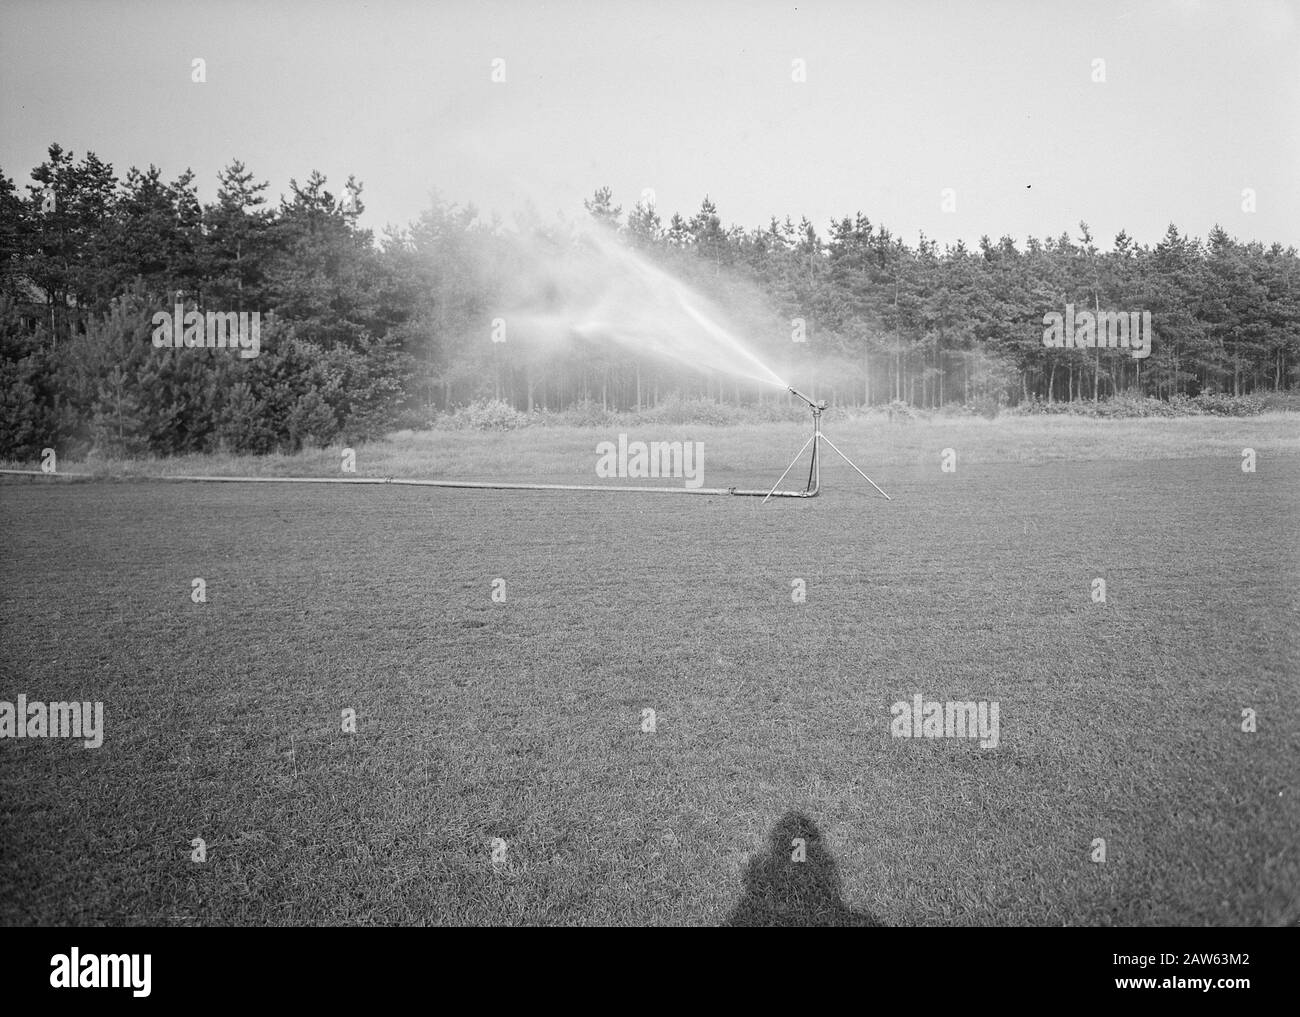 recreational areas, airports, etc., sports fields, irrigation devices, monastery koningshof Date: August 1955 Location: Noord-Brabant, Veldhoven Keywords: irrigation equipment, recreation, sports fields, airports etc. person Name: royal court monastery Stock Photo